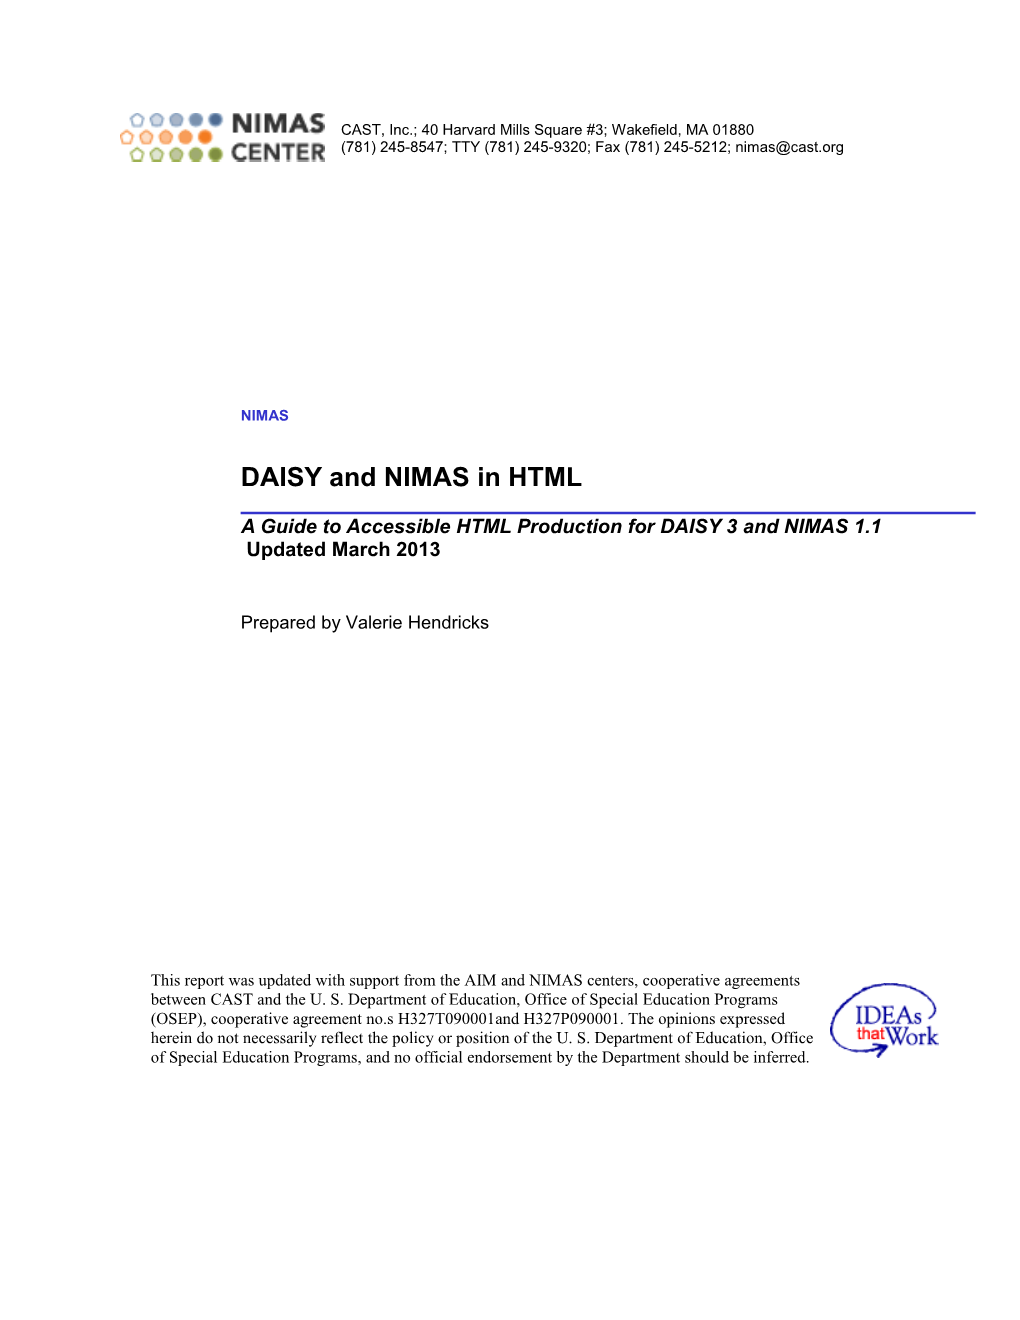 Accessible HTML Production Using DAISY and NIMAS: a Best Practices Guide